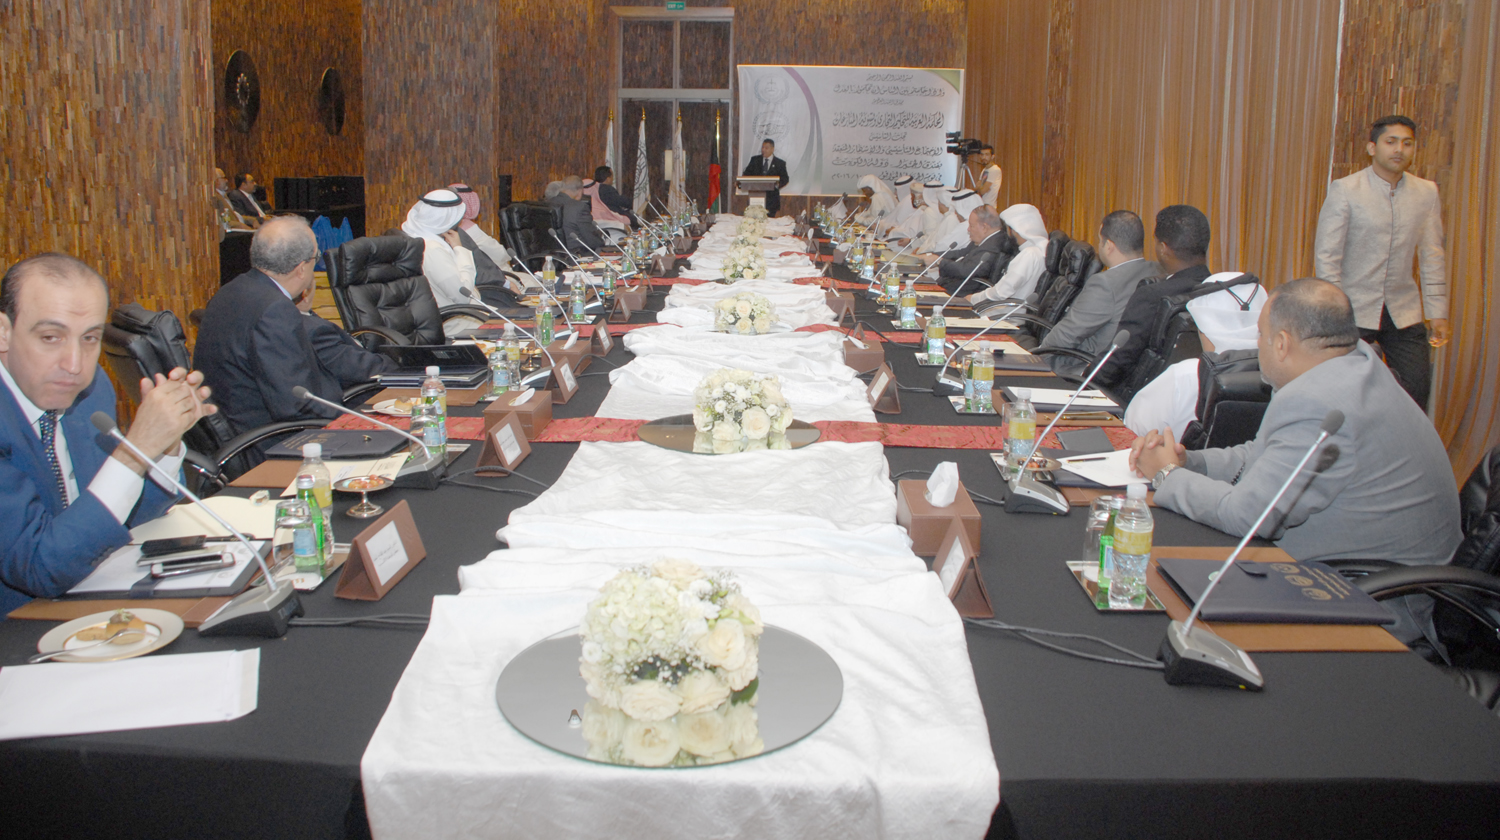 Kuwait to host Arab commercial arbitration court